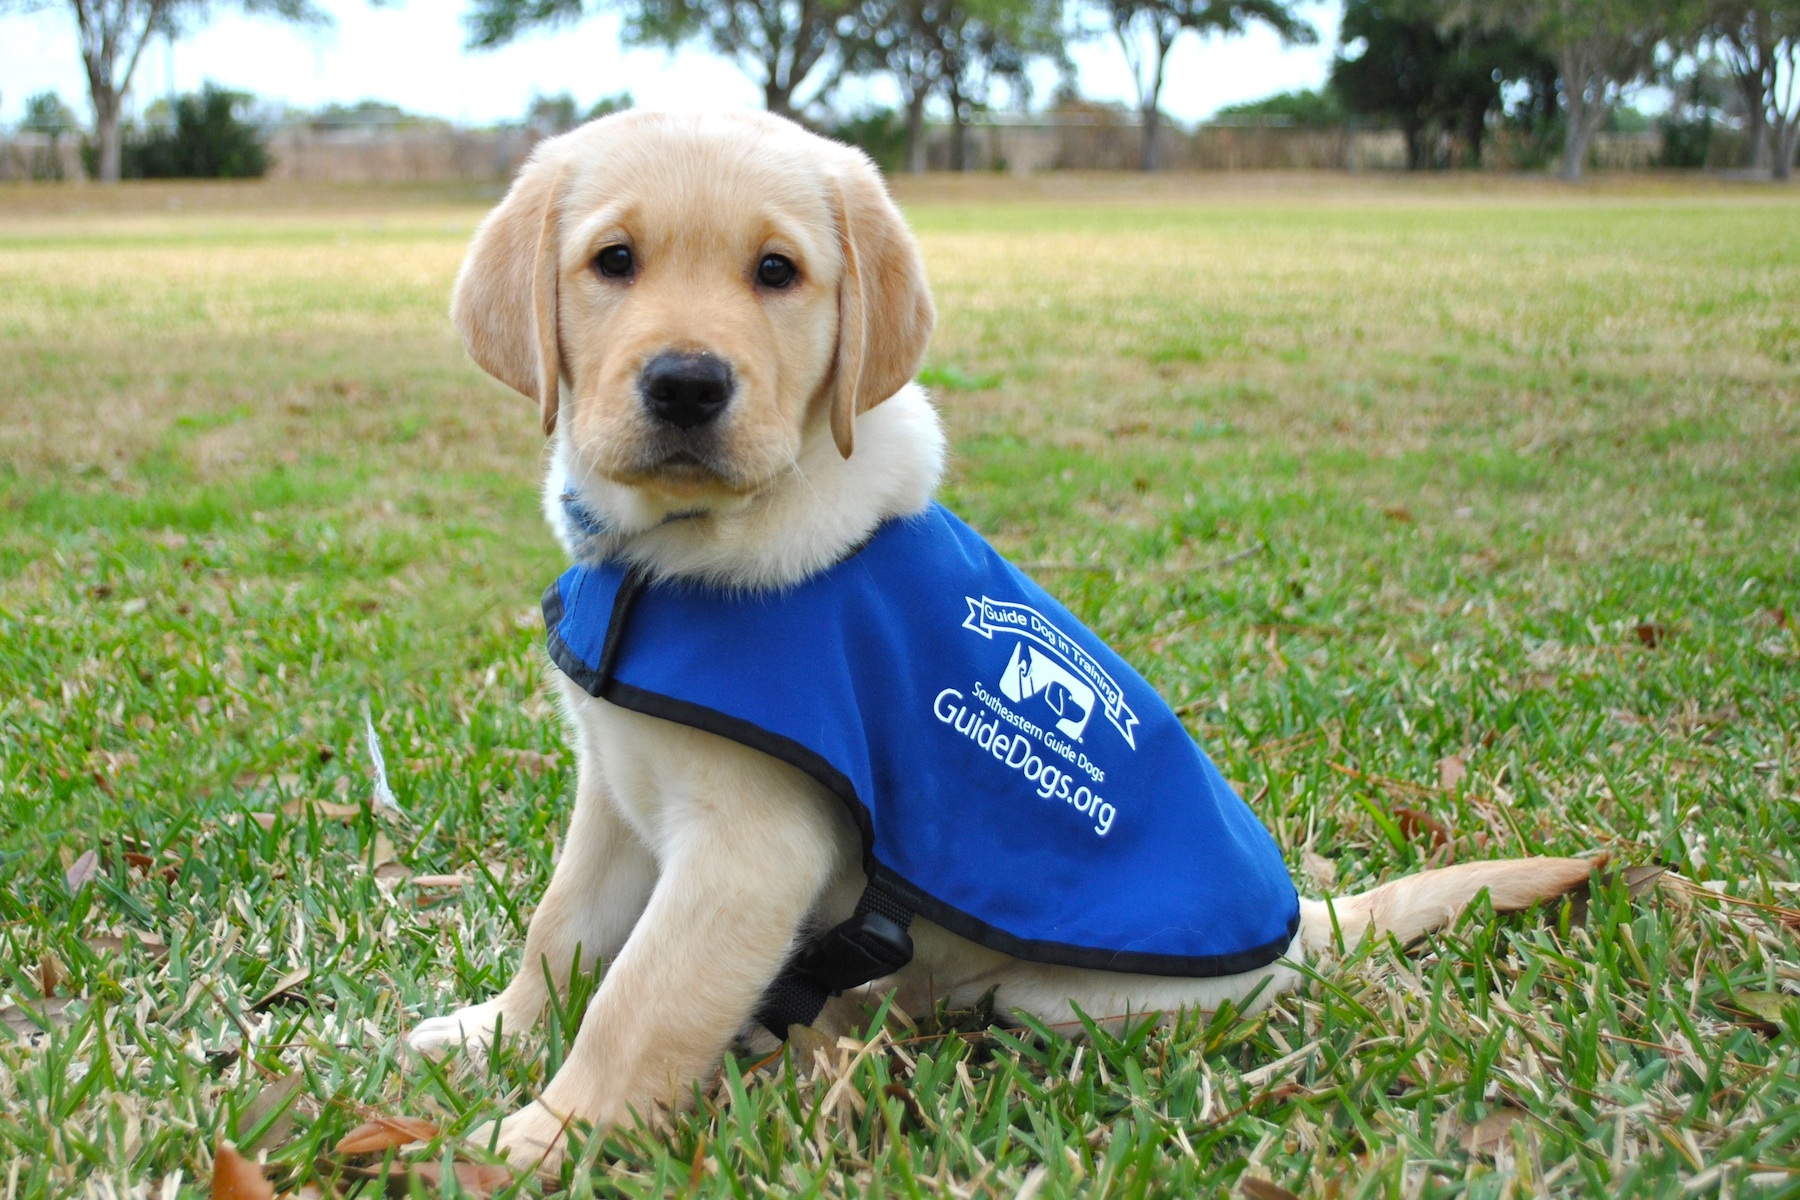 puppy guide dogs in training